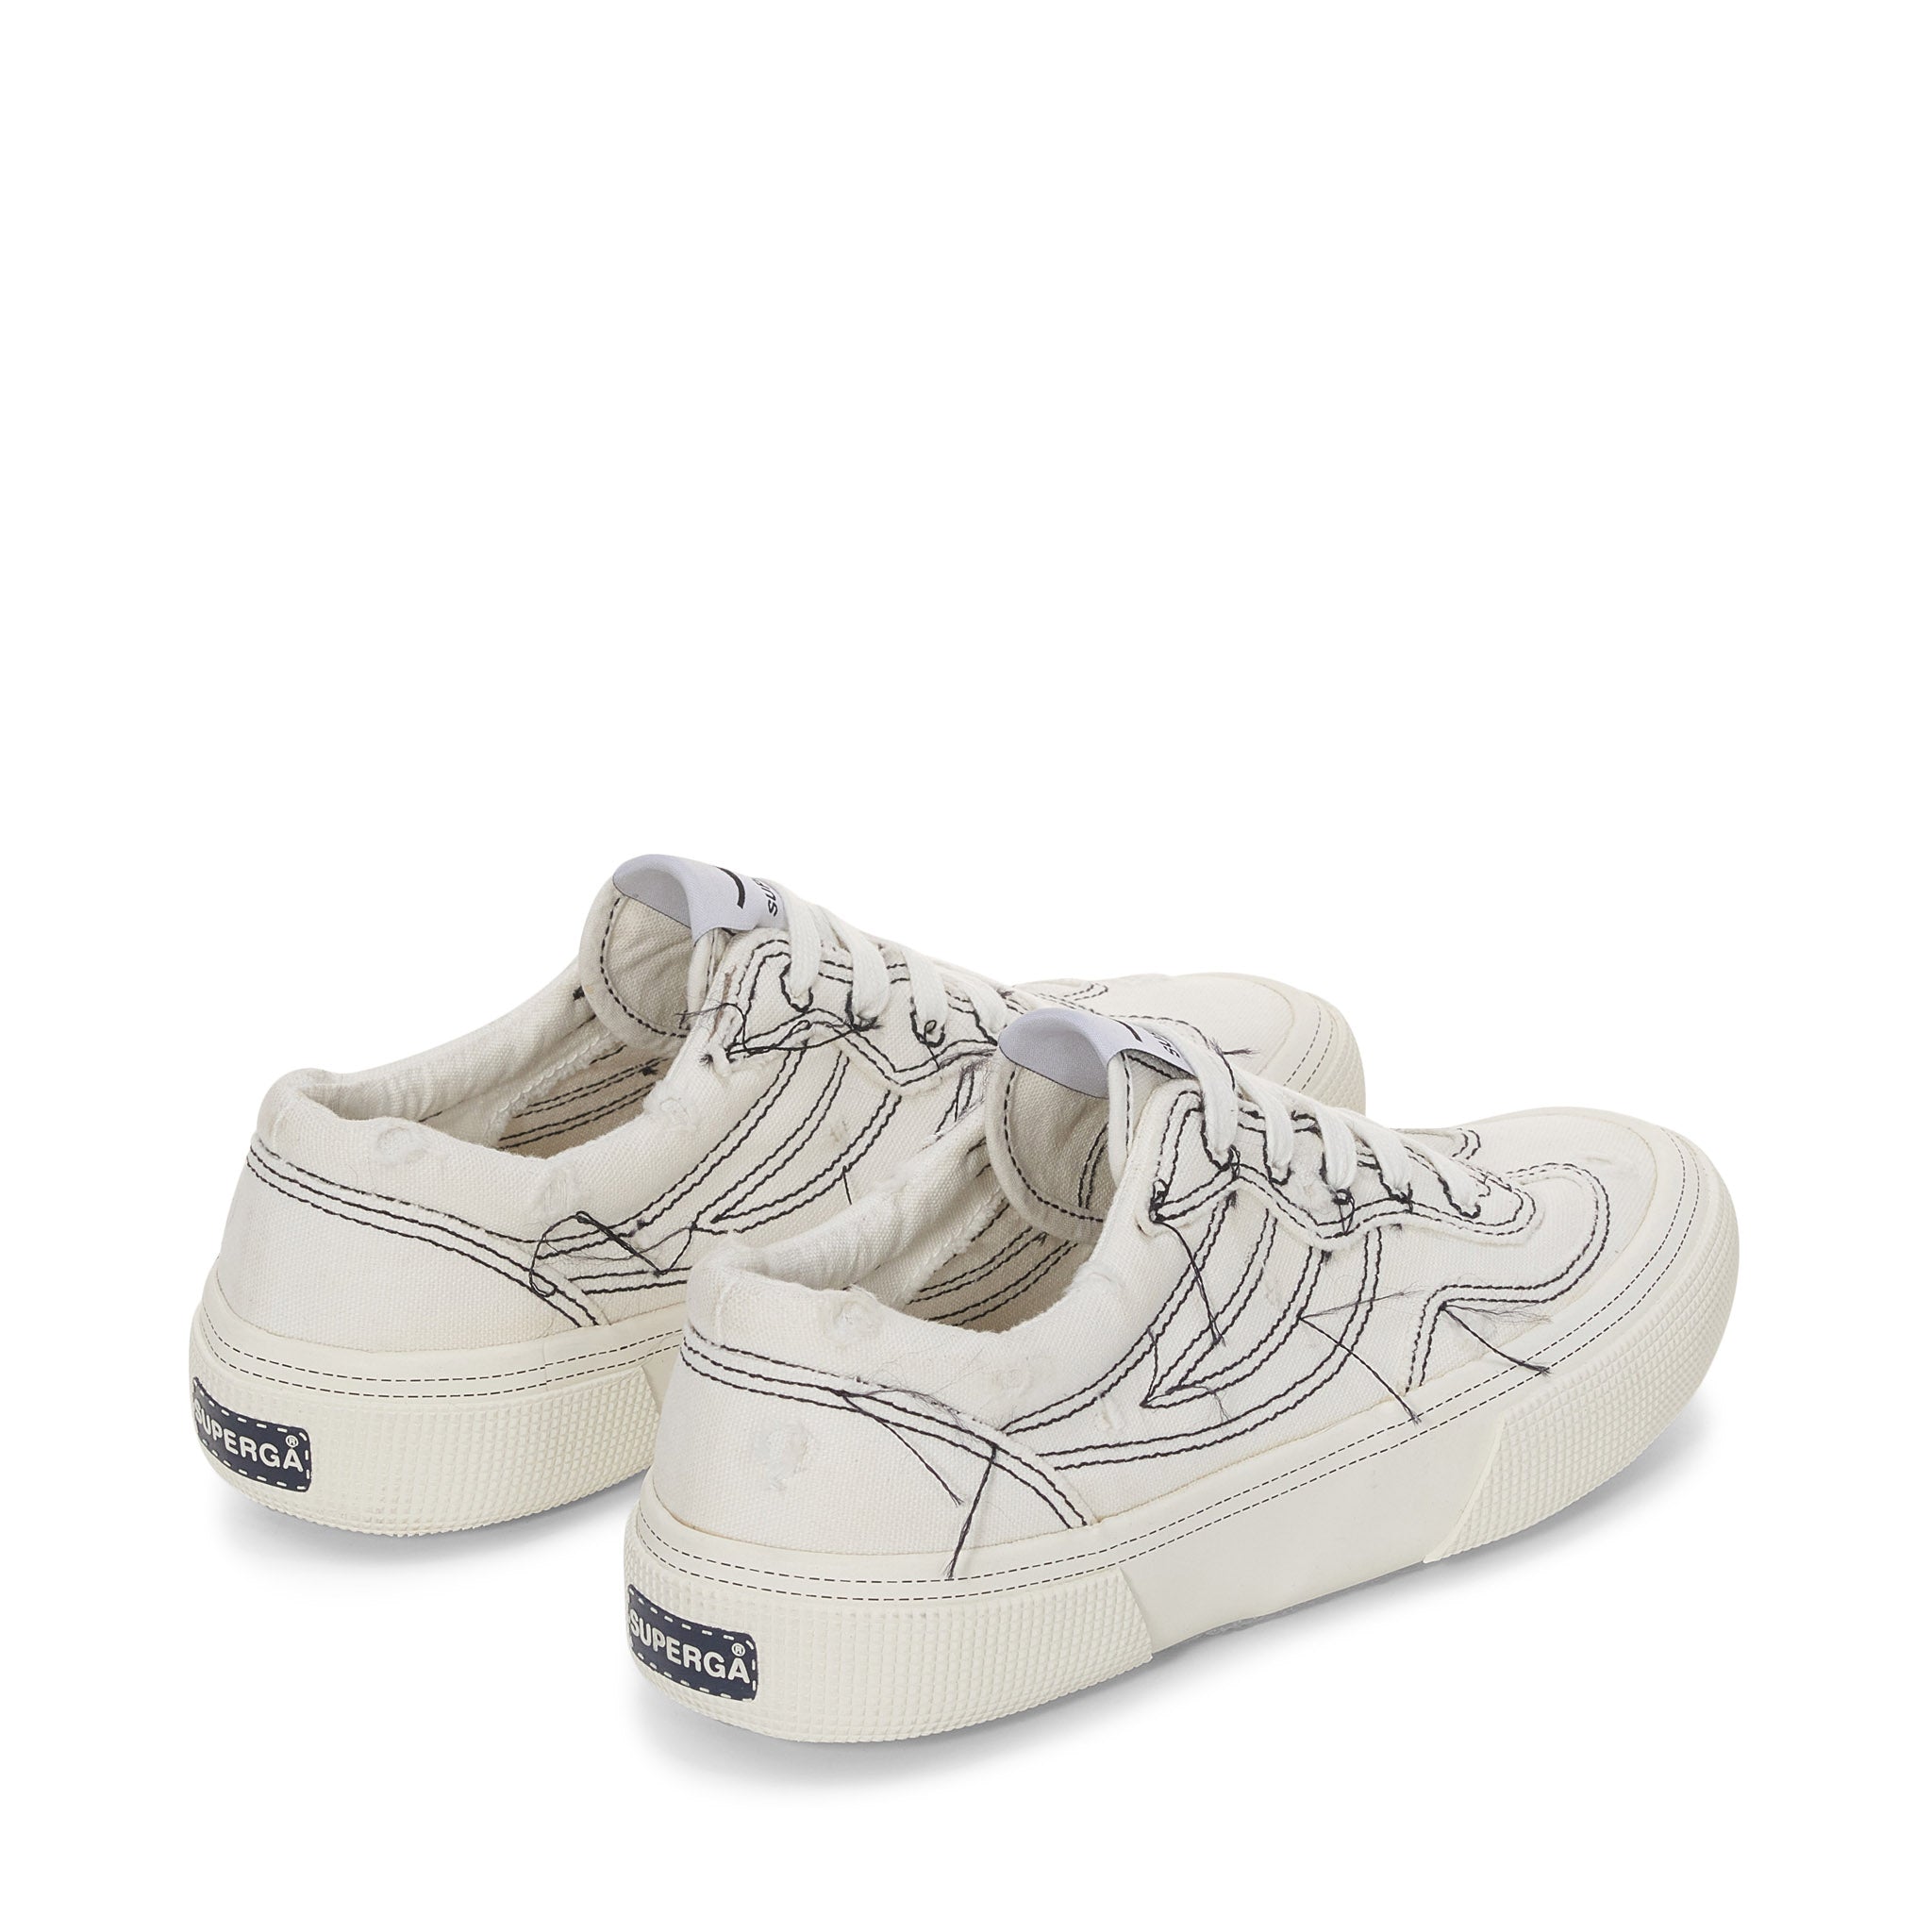 Superga 2941 Revolley Distressed Stone Washed Sneakers - White Avorio Black. Back view.